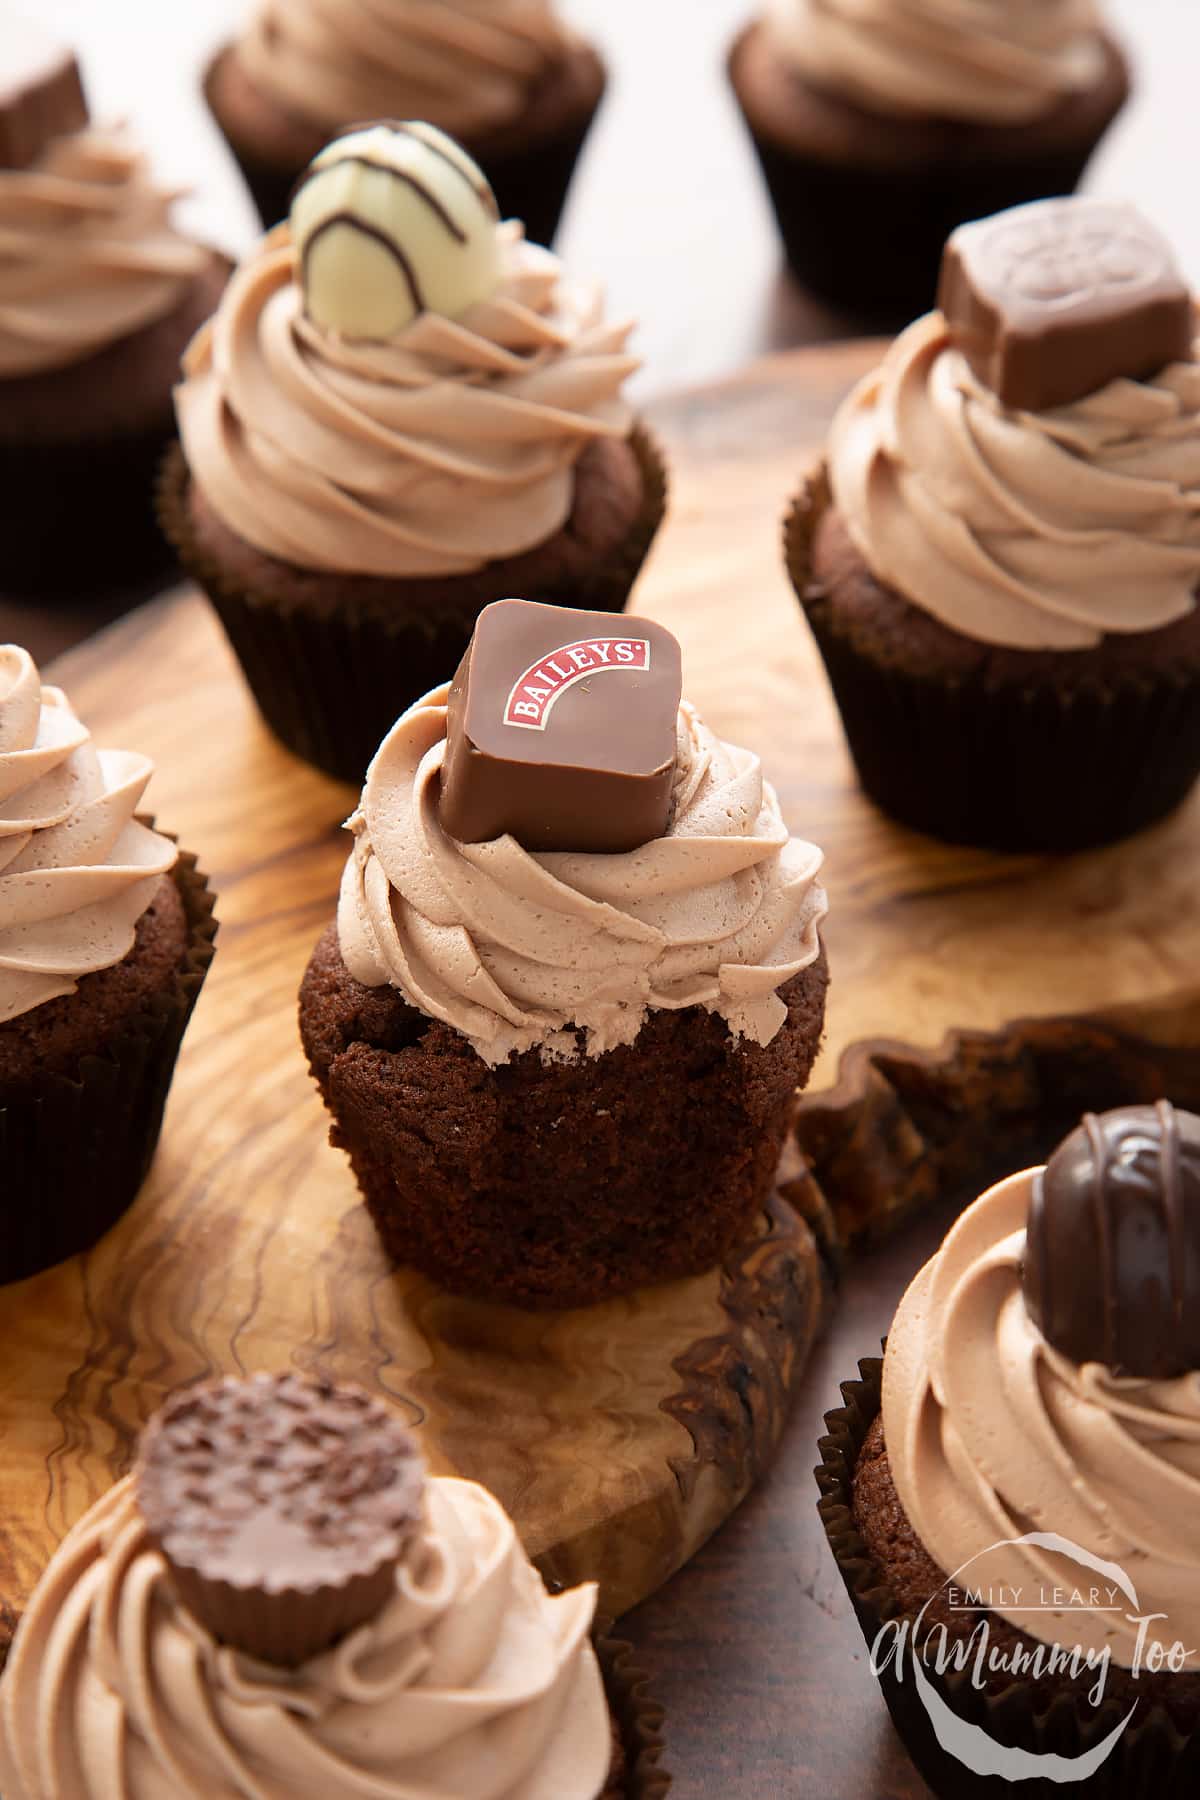 Baileys chocolate cupcakes topped with Baileys icing and a Baileys chocolate. A bite has been taken from one,